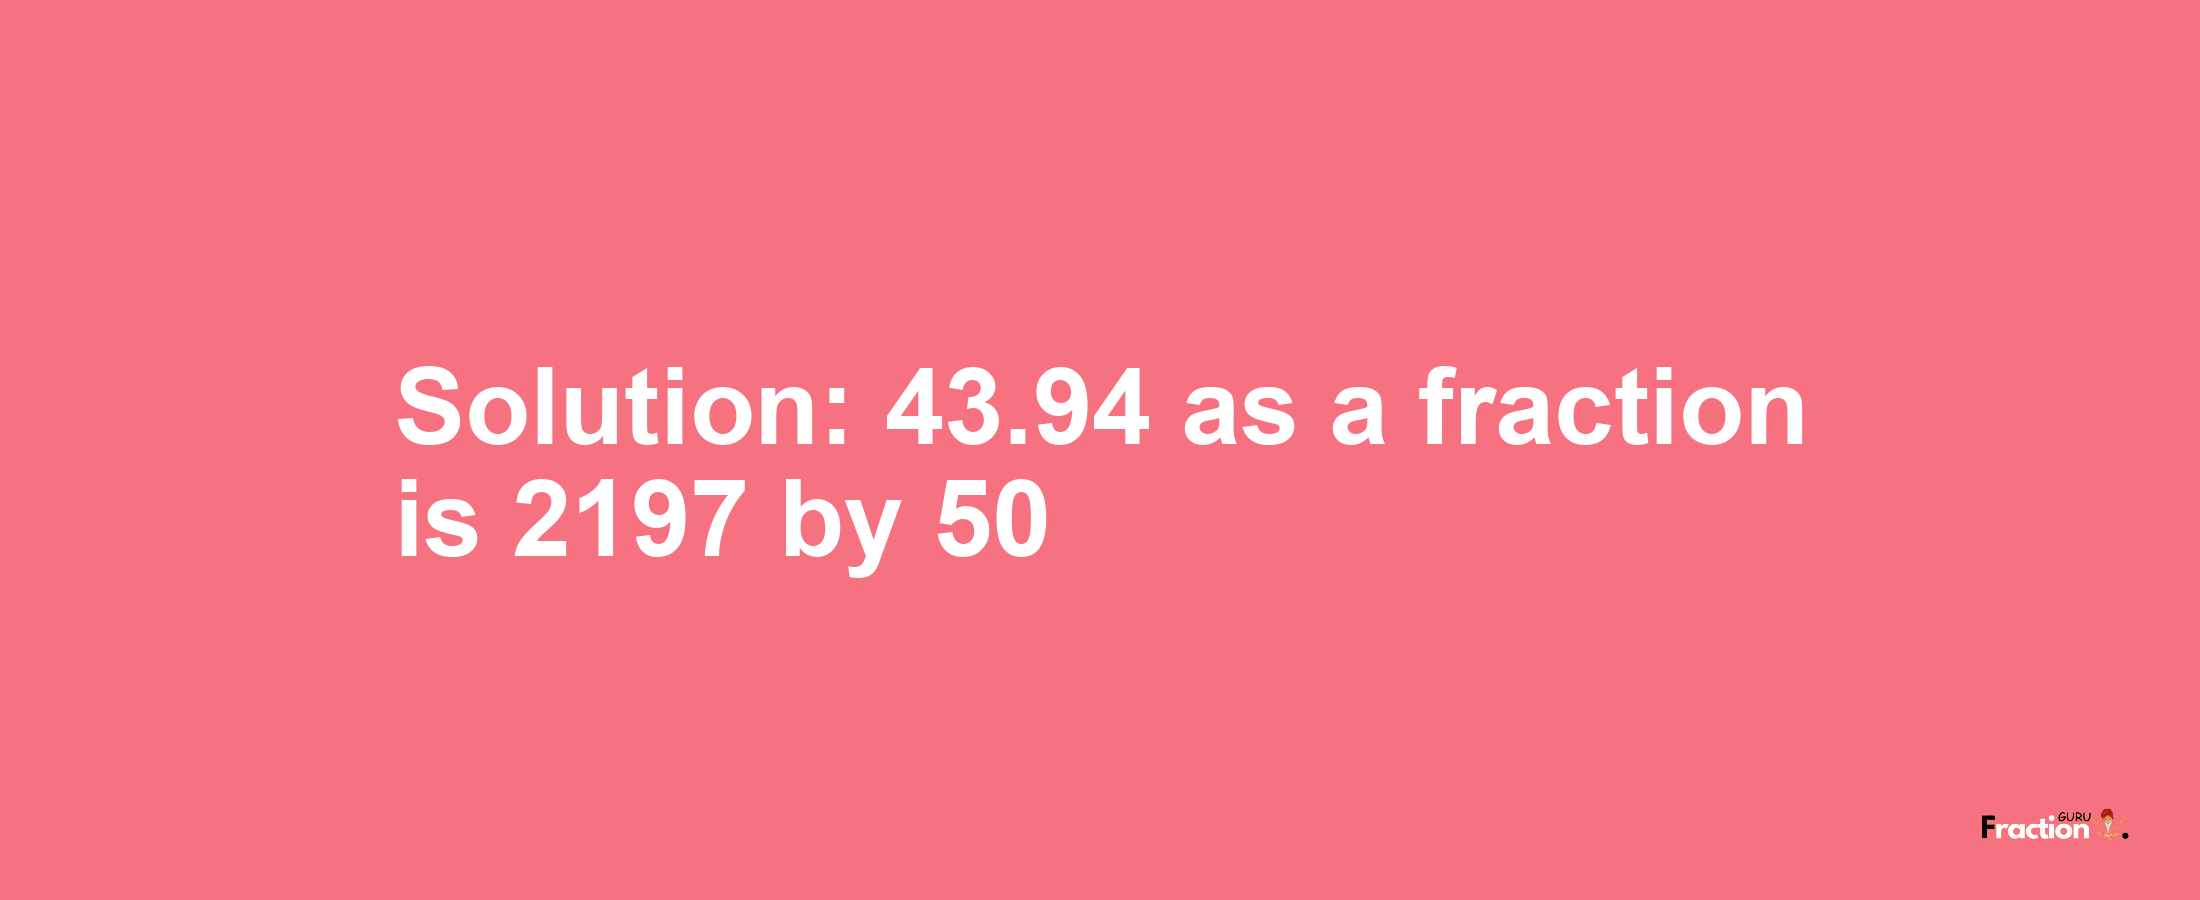 Solution:43.94 as a fraction is 2197/50